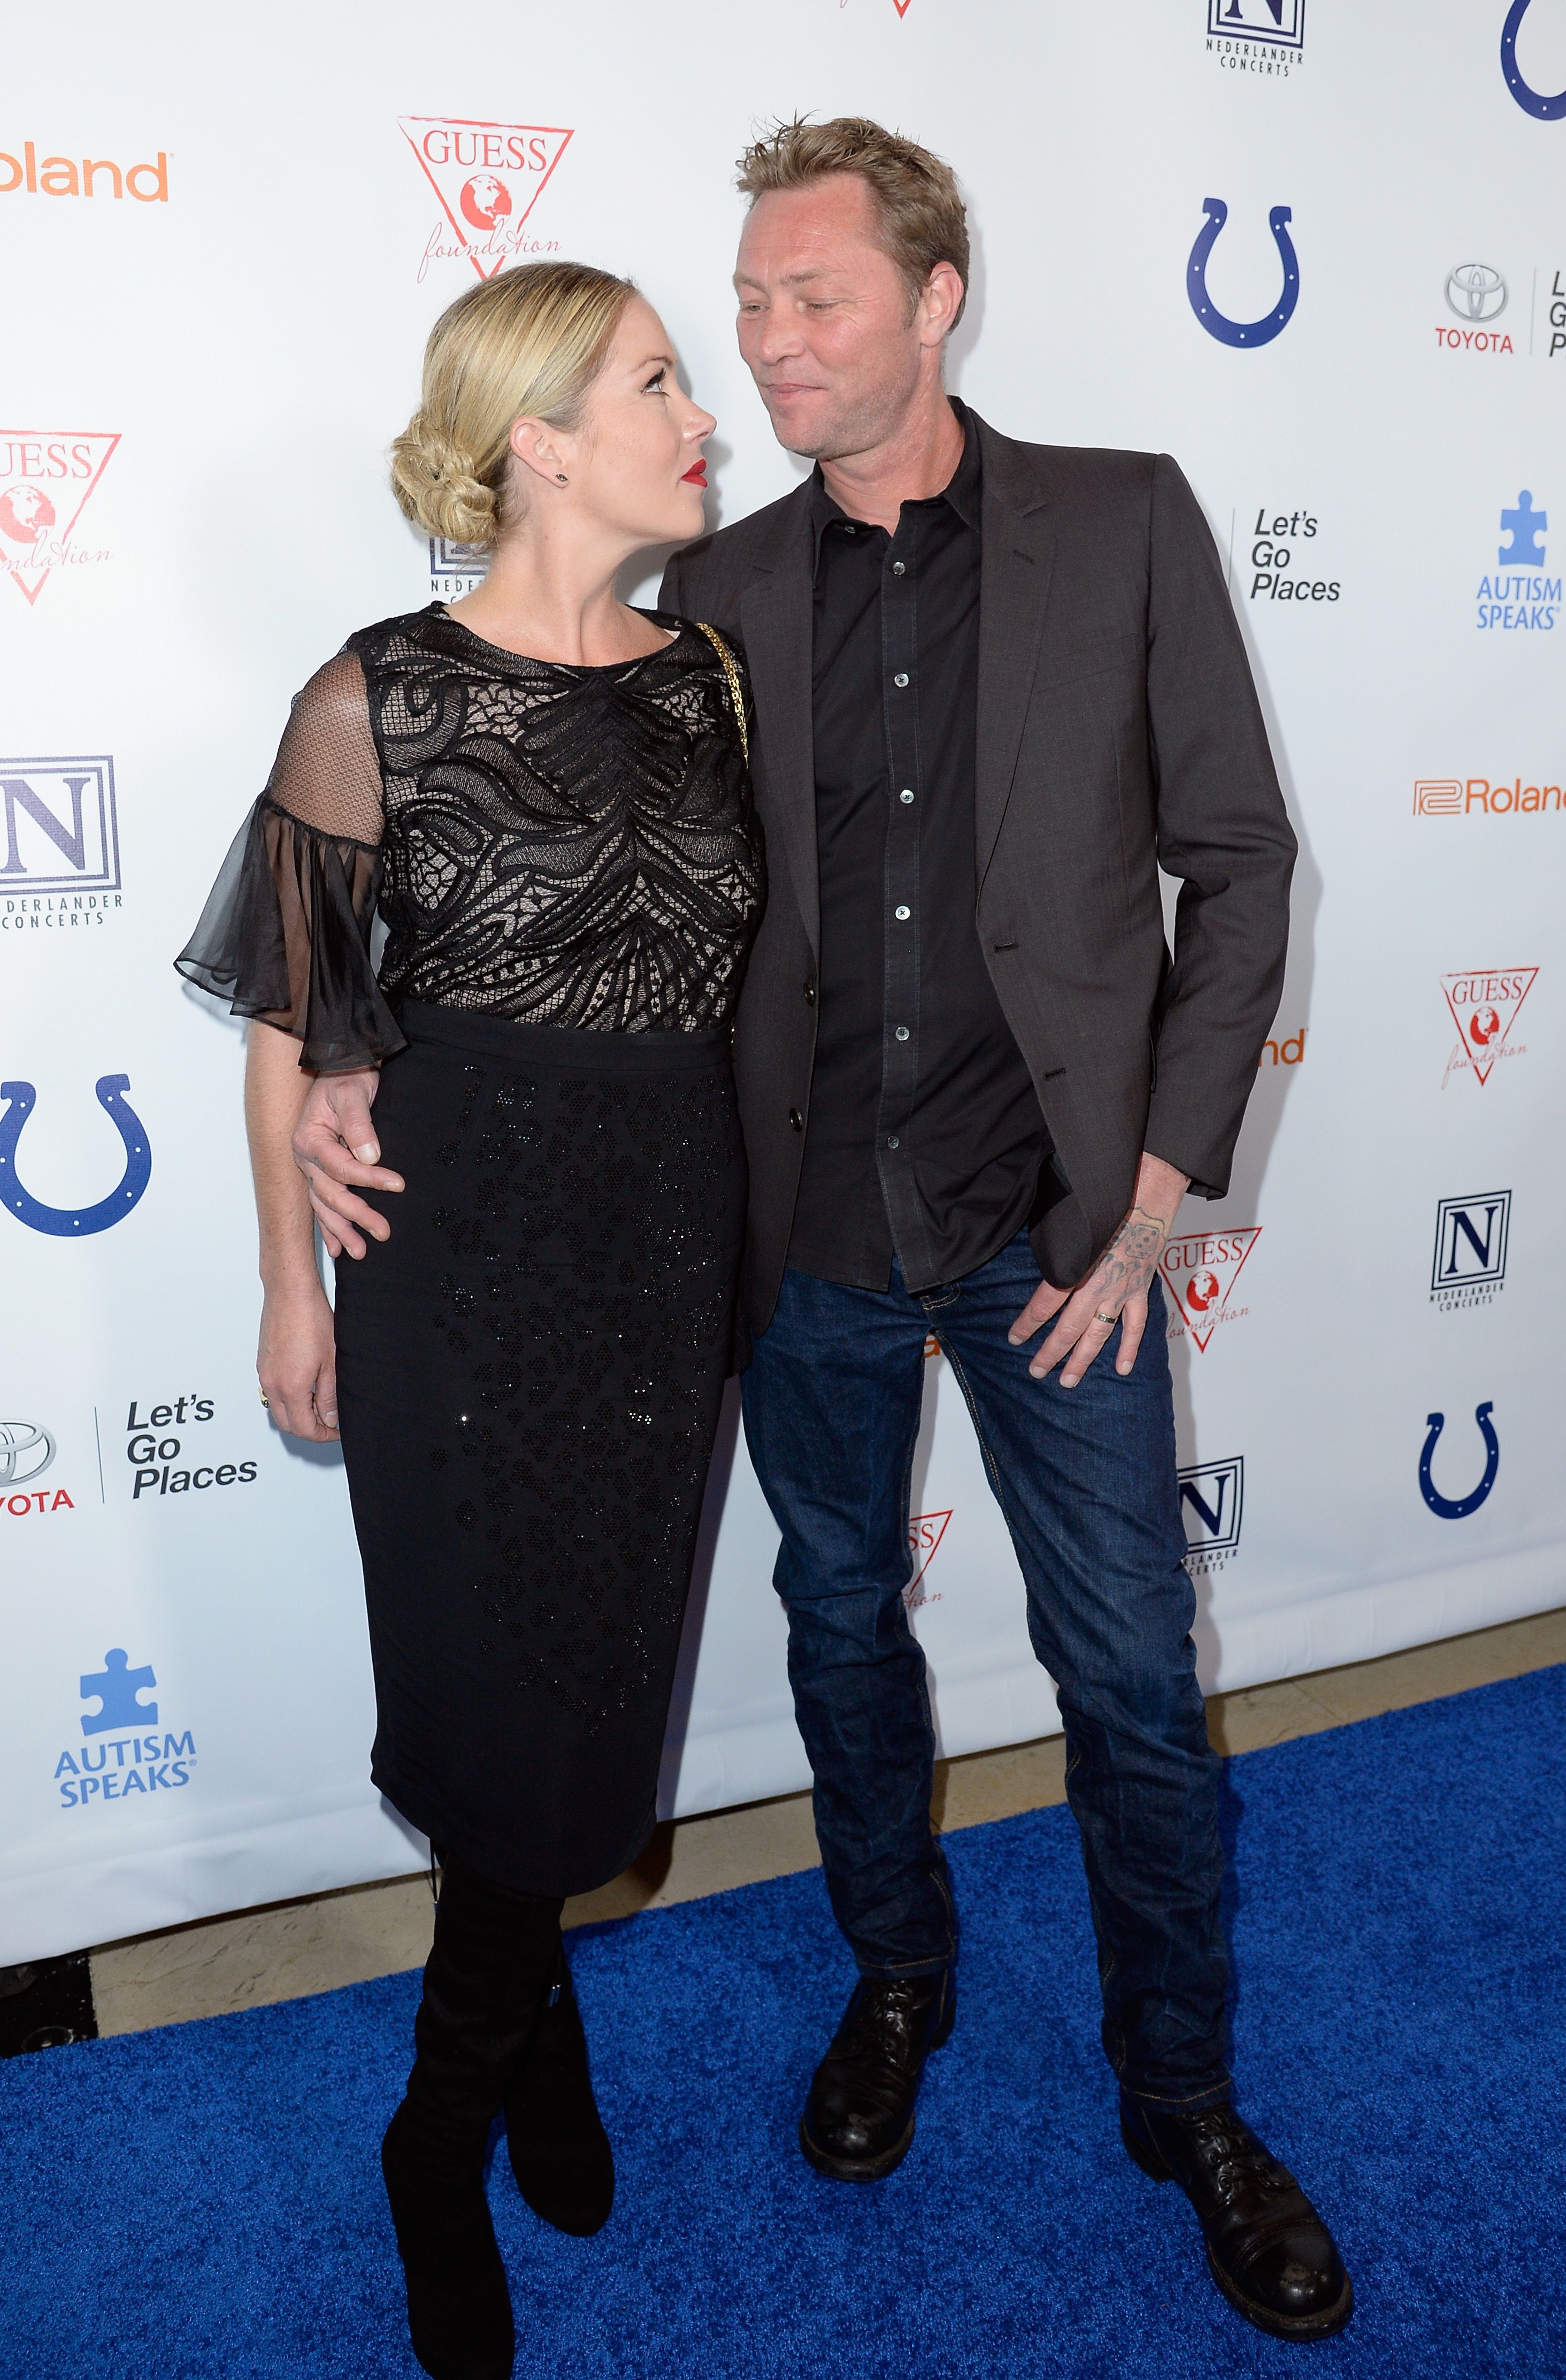 Christina Applegate and Martyn LeNoble at the 4th Annual Light Up The Blues at the Pantages Theatre on May 21, 2016, in Hollywood, California. | Source: Getty Images